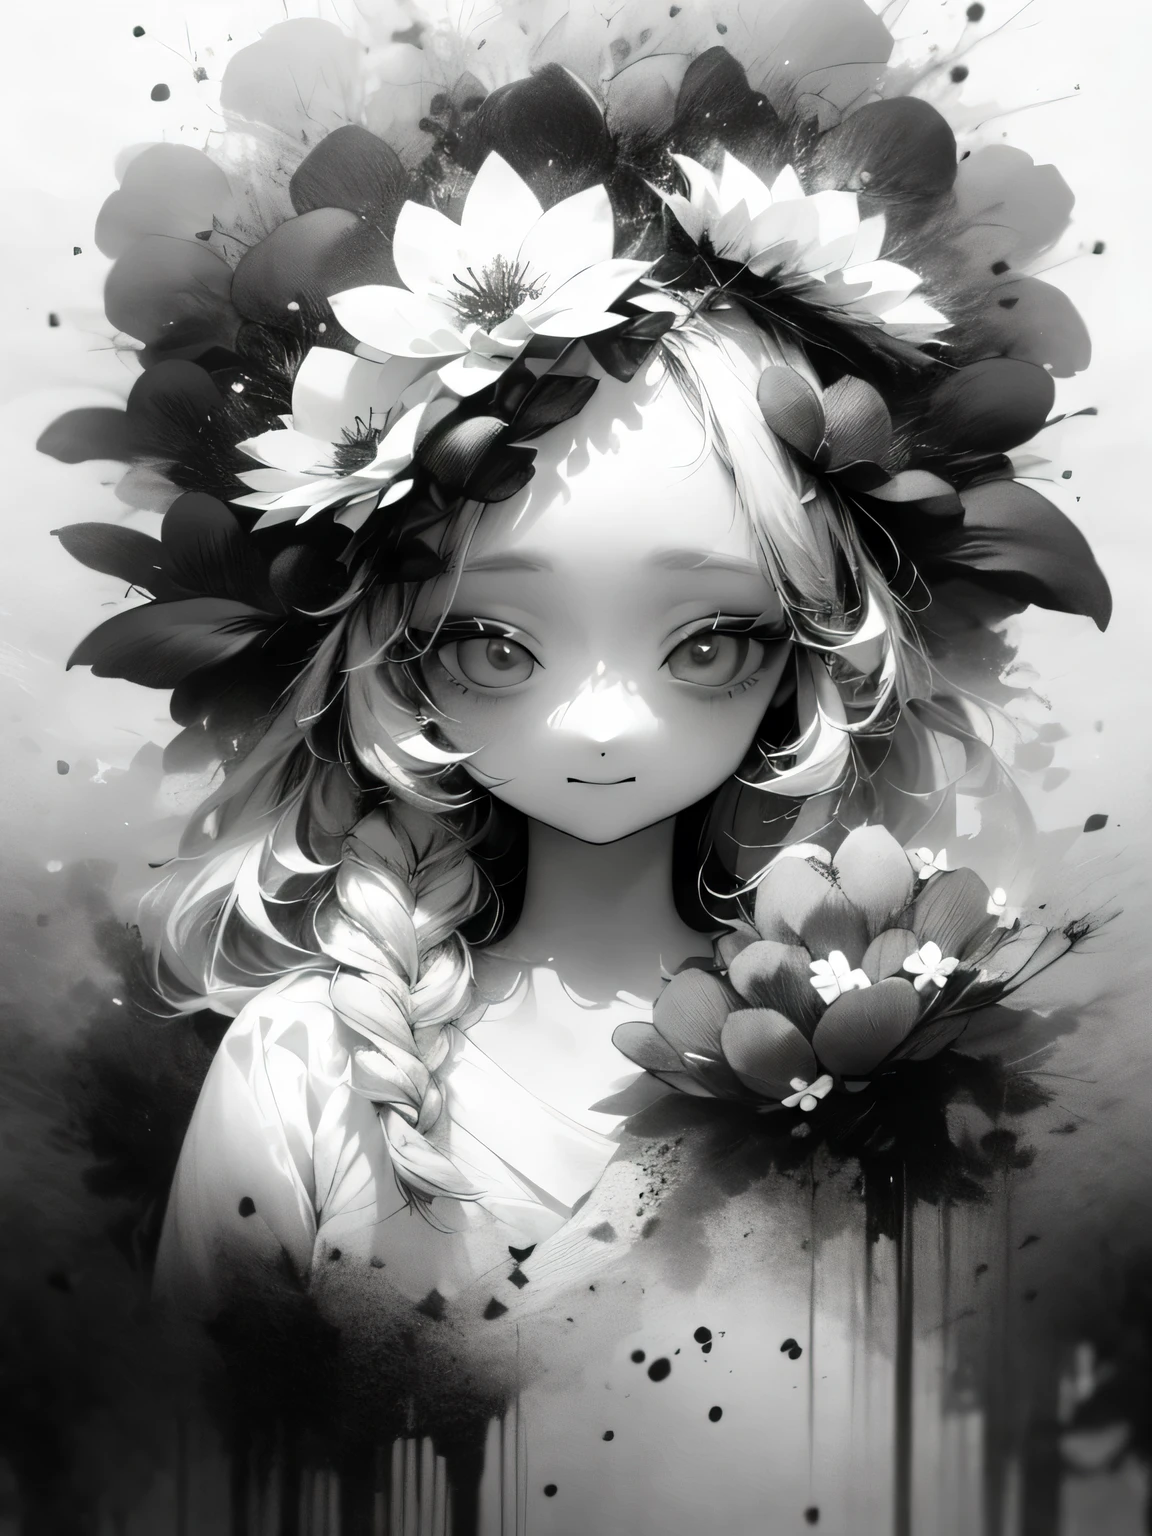 solo,1female\(chibi,cute,kawaii,age of 18,hair color white,braid hair,messy hair,eye color gray,big eyes,white skin,(monochrome:1.2),narrow eyes,smiling vely kindly at viewer,portrait\),background\((many beautiful flowers and petal:1.4)\),double exposure, BREAK ,quality\(8k,wallpaper of extremely detailed CG unit, ​masterpiece,high resolution,top-quality,top-quality real texture skin,hyper realisitic,increase the resolution,RAW photos,best qualtiy,highly detailed,the wallpaper\),(high contrast:1.4),(grayscale:1.6),monochrome